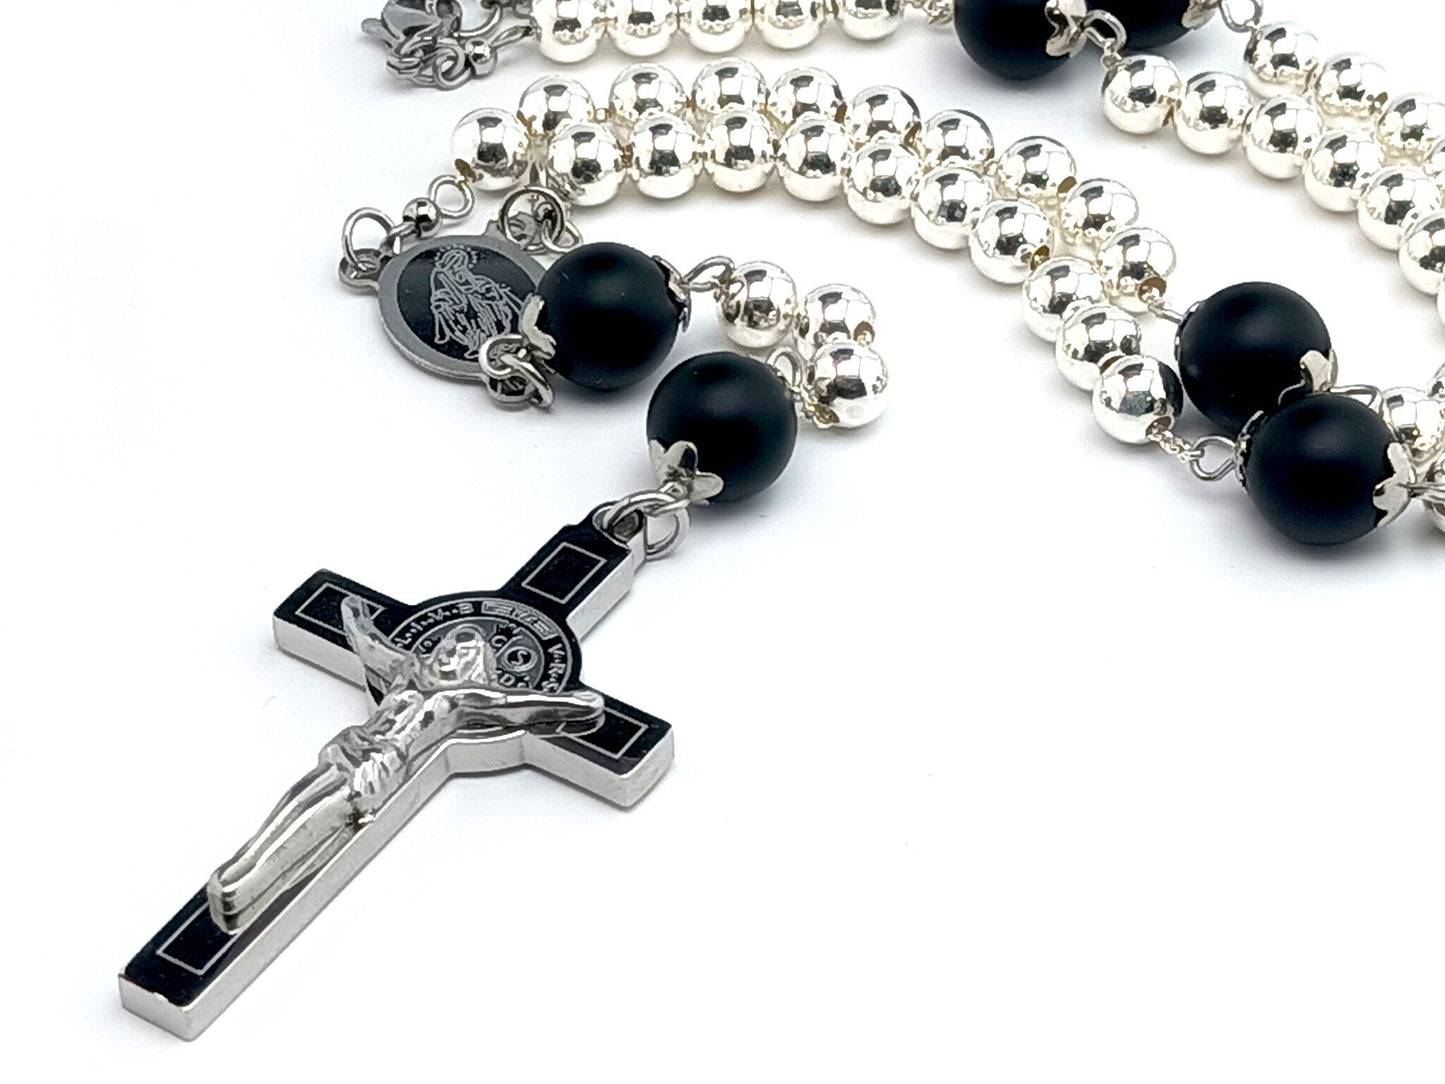 Our Lady of Grace unique rosary beads 925 sterling silver rosary necklace with matt onyx and 925 silver beads stainless steel Saint Benedict crucifix, etched medal and lobster clasp.